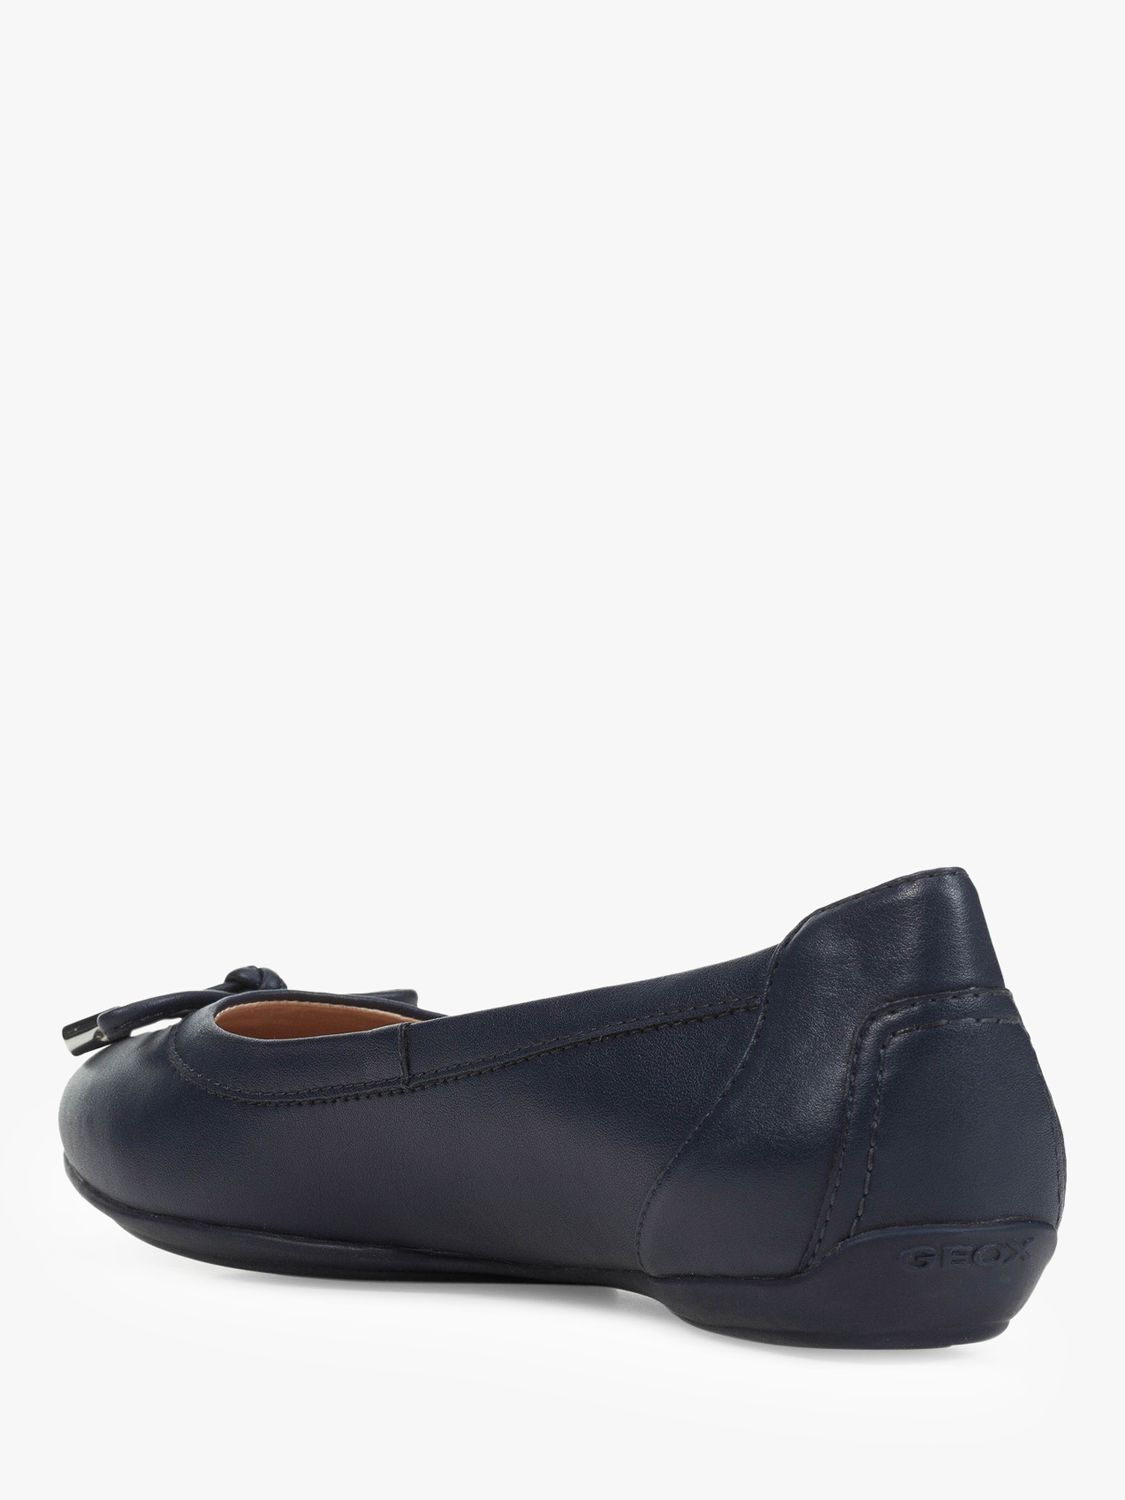 Geox Women's Charlene Wide Fit Ballet Shoes, Navy at John Lewis & Partners